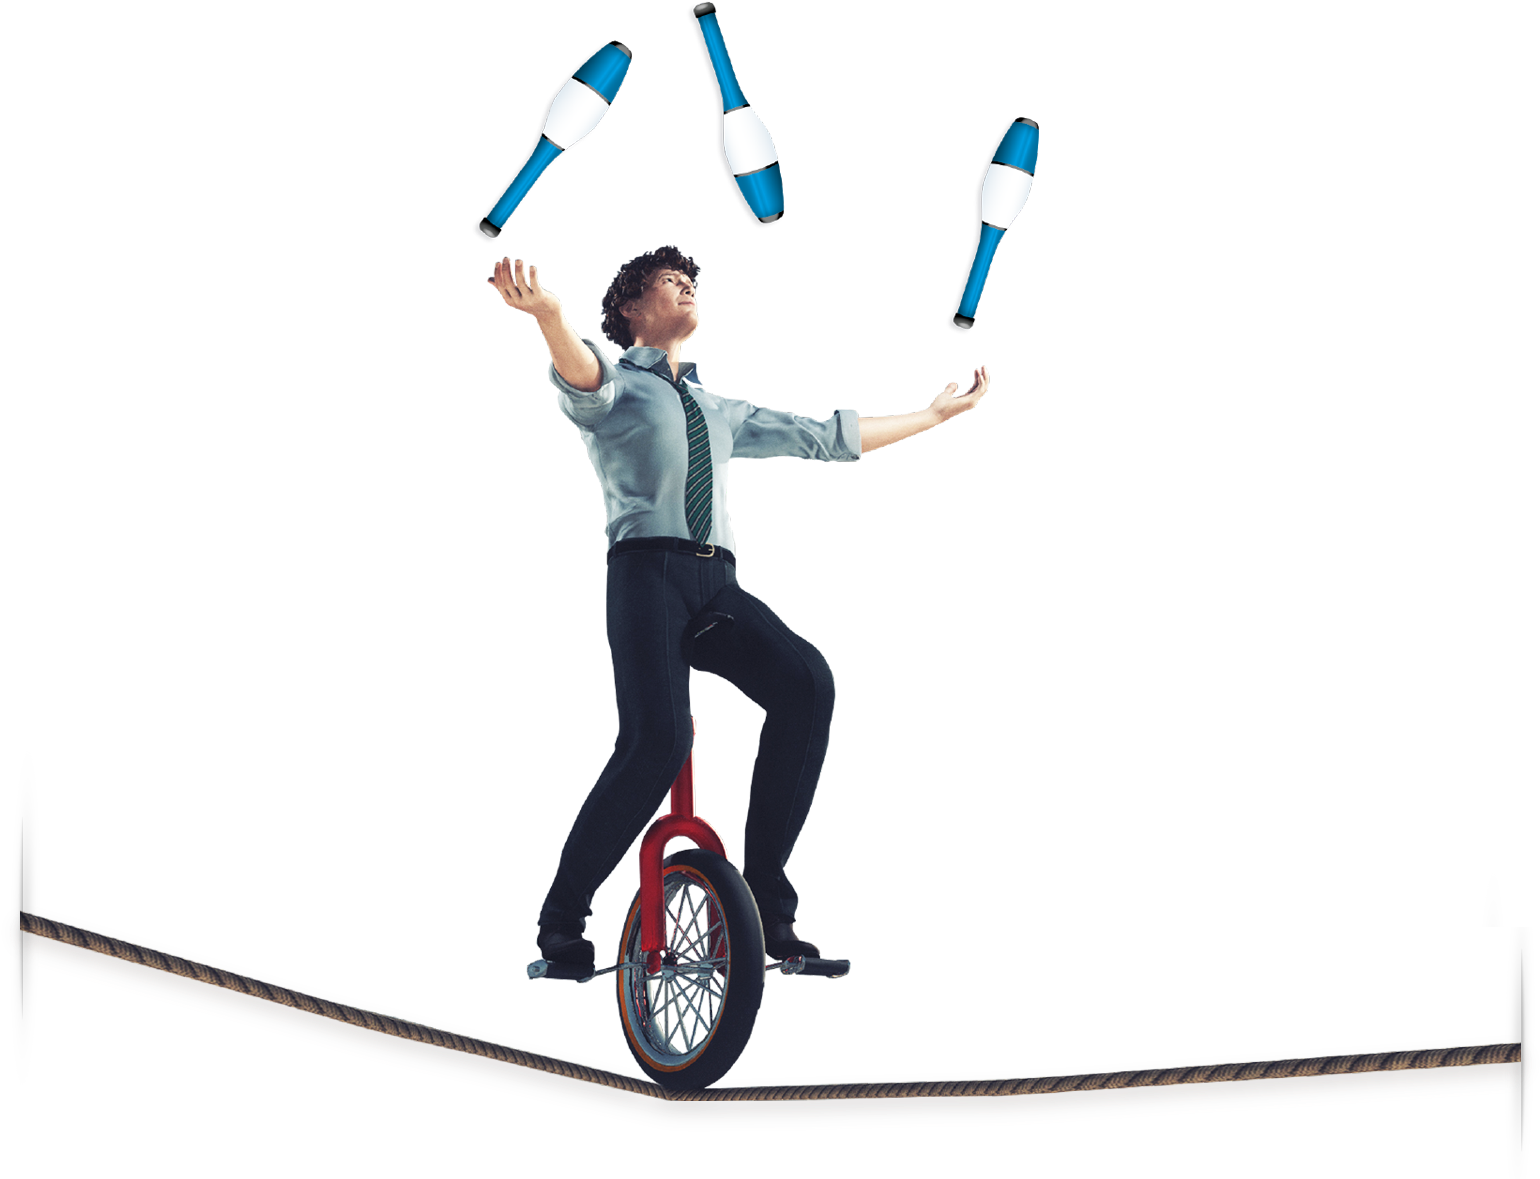 A Man On A Unicycle Juggling